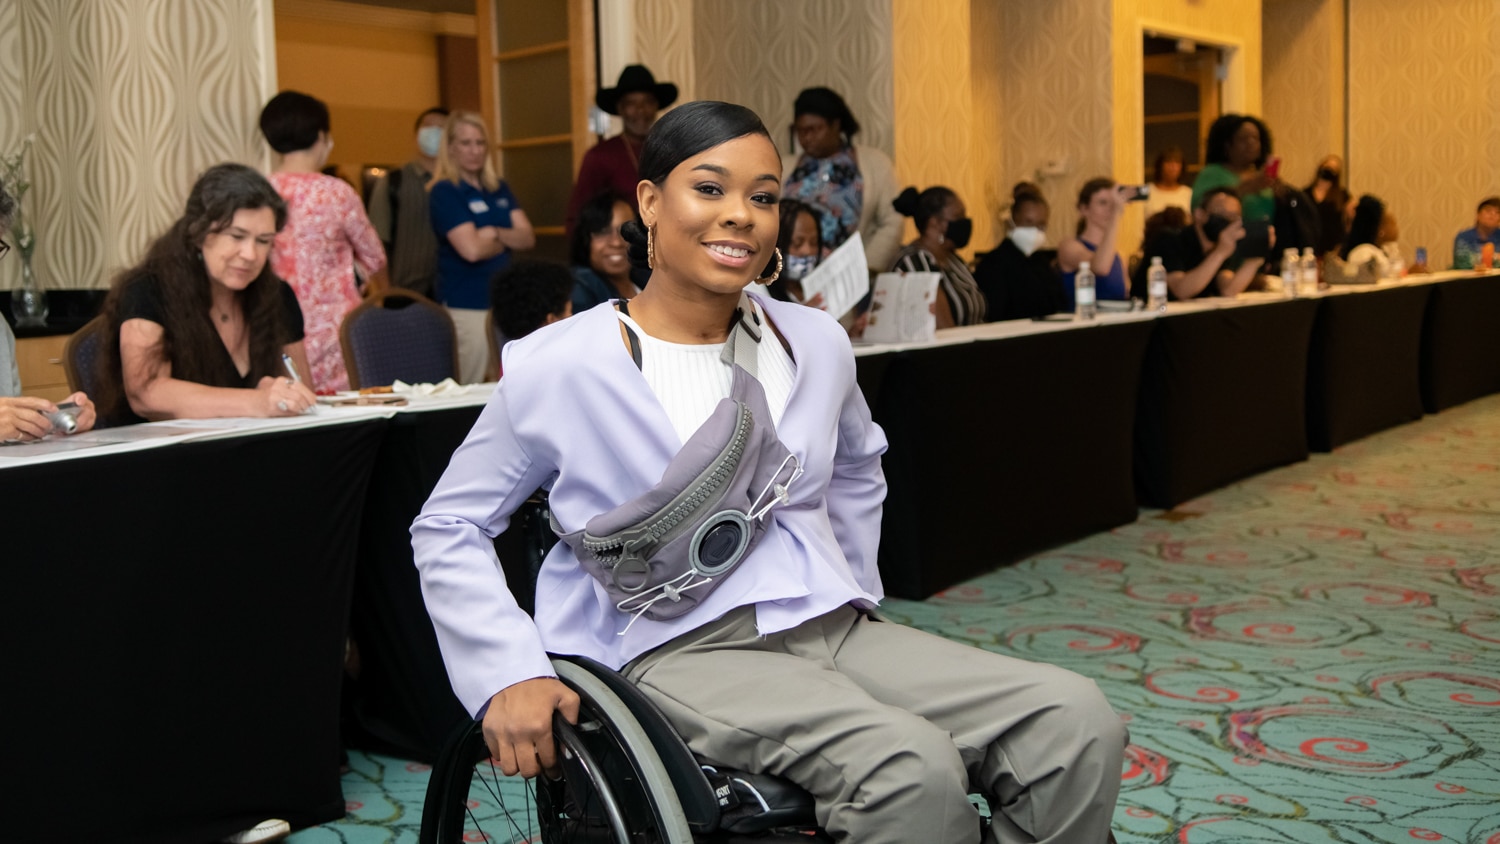 A wheelchair user shows off her fashionable lavender outfit during the “A Voice at the Table" conference.